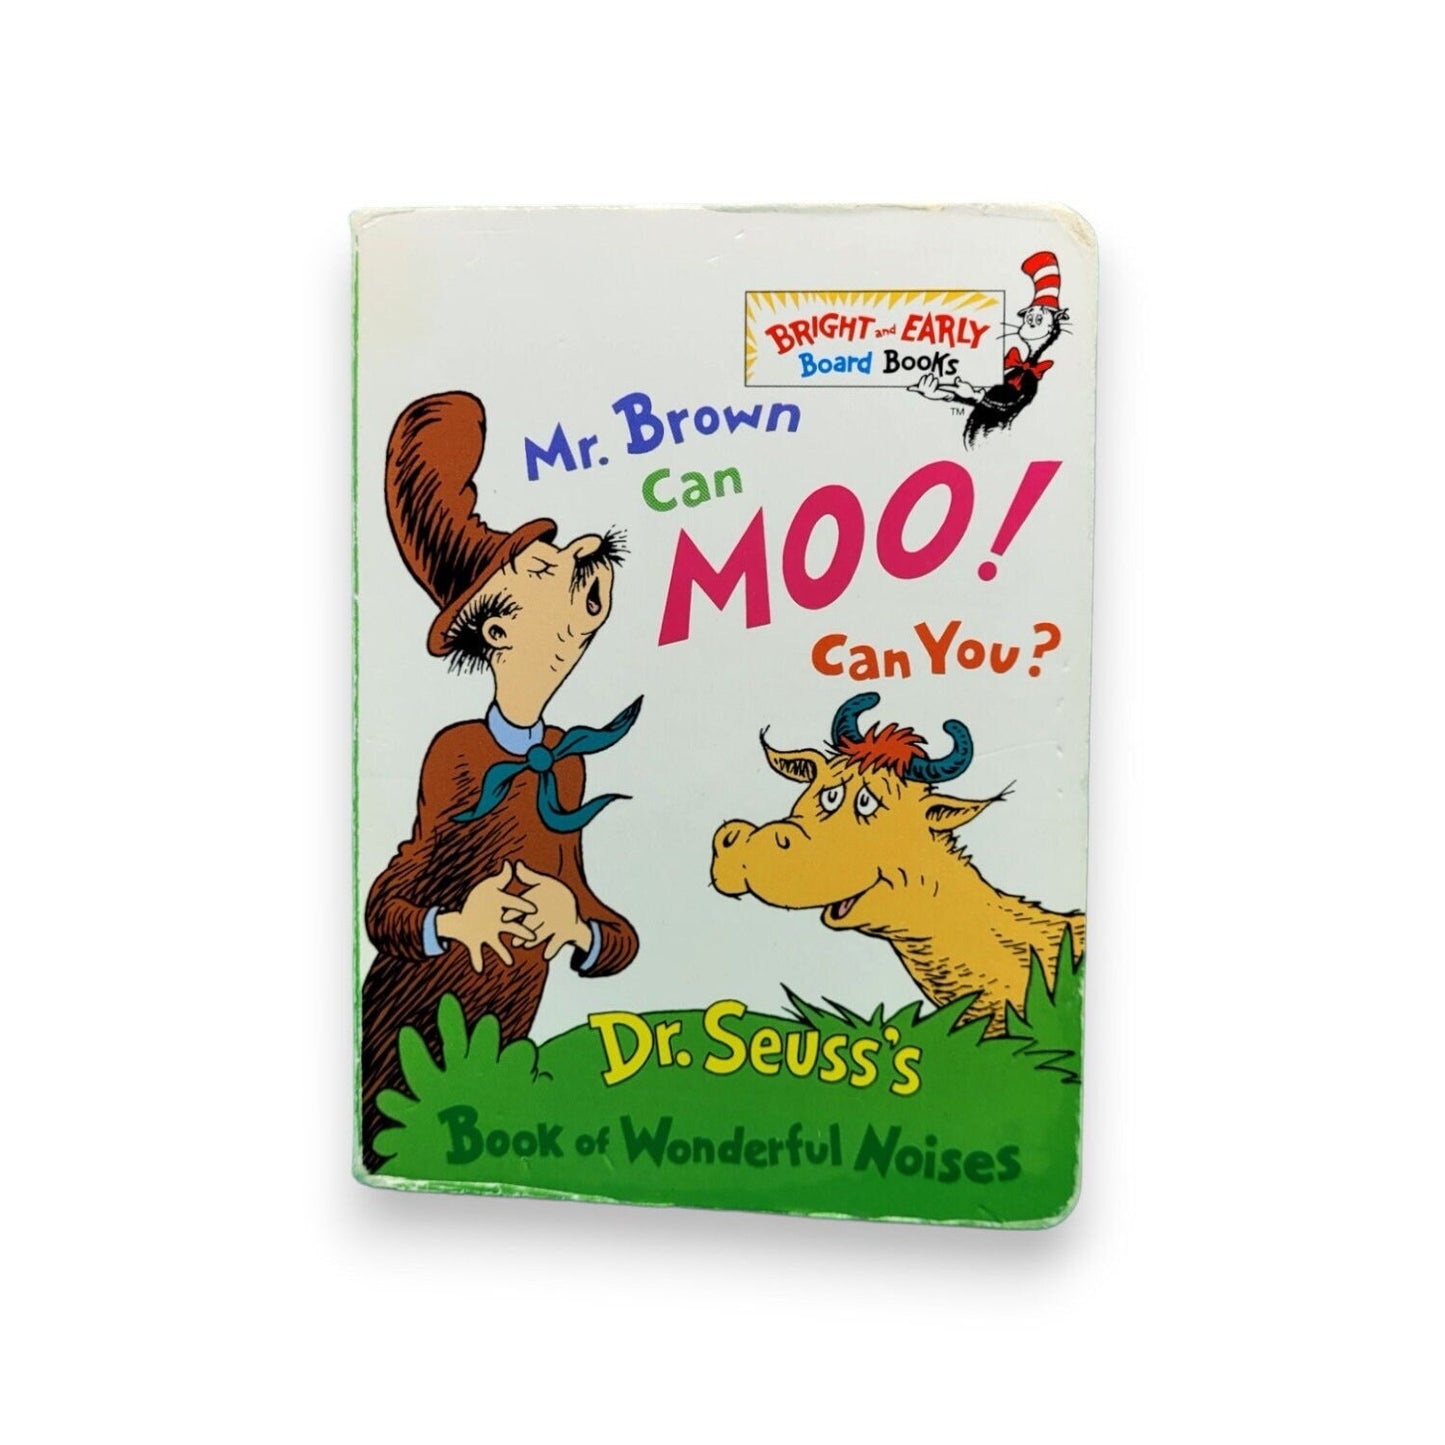 Mr. Brown Can Moo! Can You? by Dr. Seuss 1970